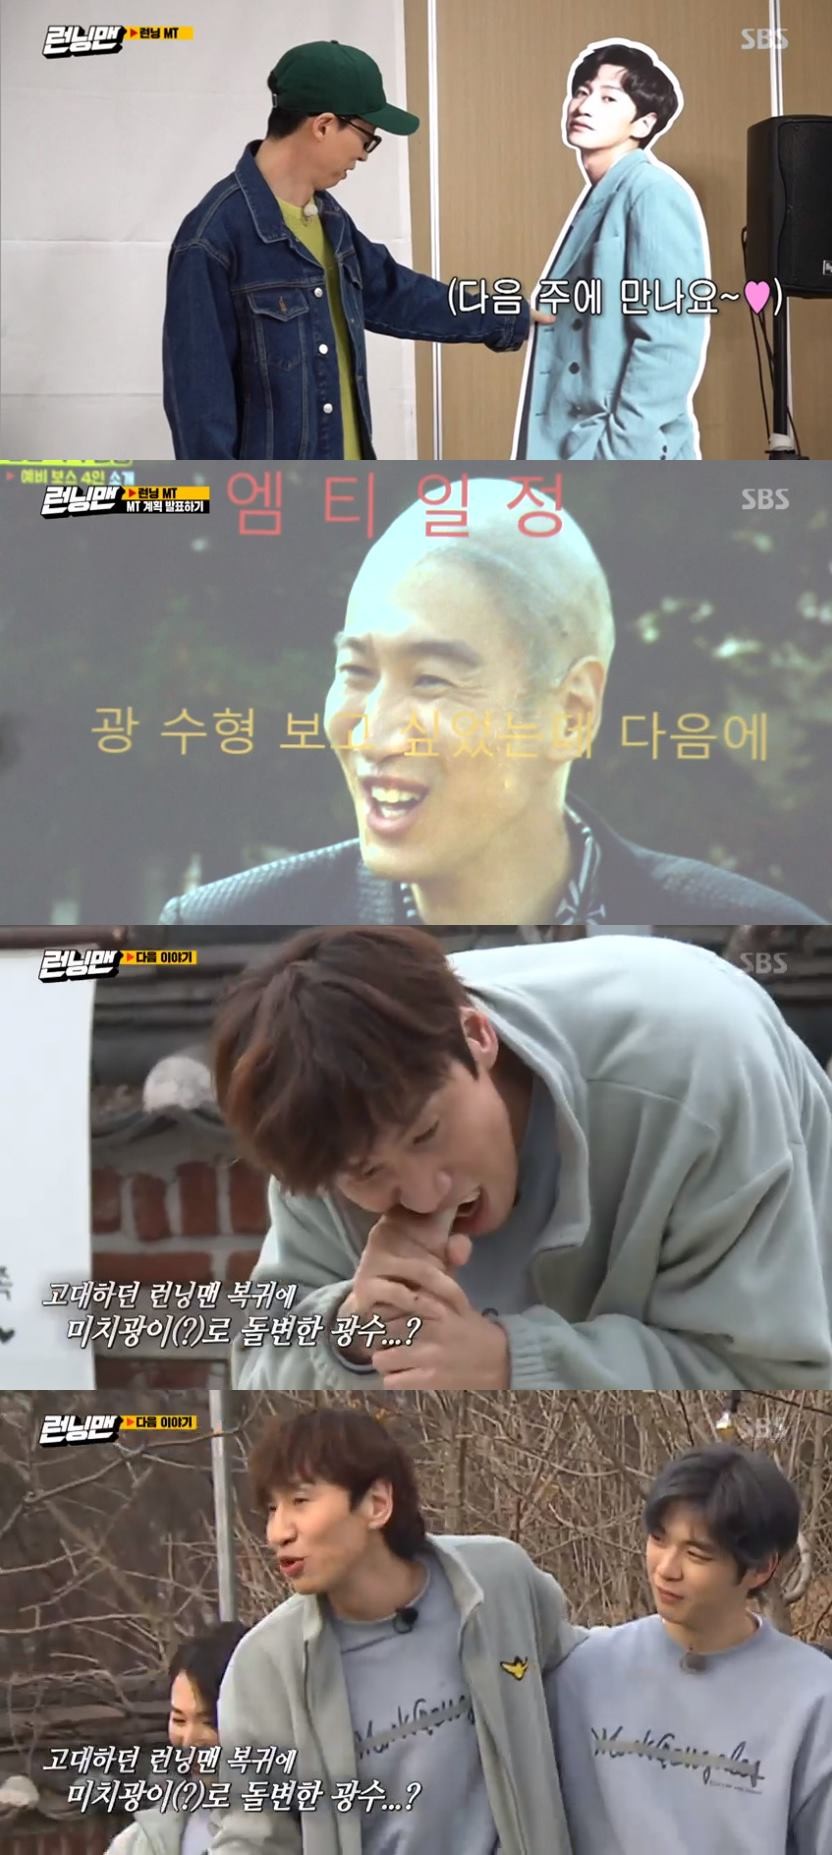 Lee Kwang-soo, who missed the Running Man recording for two consecutive weeks due to a traffic Accident, showed off his crazy presence as if he were together, and announced that he would finally return next week.In SBS Running Man broadcasted on the 15th, Running MT was decorated with Running MT, and Lee Kwang-soo, who was in a traffic Accident, appeared in the opening ceremony and appeared as a telephone connection.When I saw Lee Kwang-soos lighthouse, the members were pleased. In particular, Yoo Jae-Suk said, I am picture of standing-person.Then, with the subtitle Meet me next week appeared, raising expectations.Im Soo-hyang and Jo Byung-gyu joined together as guests on the day, and the two mentioned Lee Kwang-soo and made a longing for him. Im Soo-hyang had a drink with Lee Kwang-soo and Jeon So-min before.However, Jeon So-min continued to play the Game and told the story of the run.Jo Byung-gyu said, I wanted to meet my brother, Lee, and decorated the MT plan PPT document with Lee Kwang-soos photo.In addition, Jo Byung-gyu continued to be angry with Yoo Jae-Suk and Ji Suk-jin, and the members said that Jo Byung-gyus appearance was like Lee Kwang-soo, filling the vacancy.The members tried to connect Lee Kwang-soo by phone. Lee Kwang-soo, after Yoo Jae-Suk, Ji Suk-jin called but did not answer.Yoo Jae-Suk and Ji Suk-jin made a bet on who Lee Kwang-soo calls.As expected, Lee called Yoo Jae-Suk. Yoo Jae-Suk asked why he called him, and Lee Kwang-soo said, I do not know.Asked if he could make a video call, Lee Kwang-soo said, Its not a word. He said he would return to a healthy state.Lee Kwang-soo was diagnosed with a right ankle fracture and was being treated after a traffic Accident on January 15th. Last week, he did not attend the Running Man recording and collected topics.Lee Kwang-soos return to the show was curious, and next weeks broadcast of guest Kang Daniel and Lee Kwang-soo was predicted to return.Lee Kwang-soo, who is still on crutches, seemed not to have recovered completely, but his performance is expected.